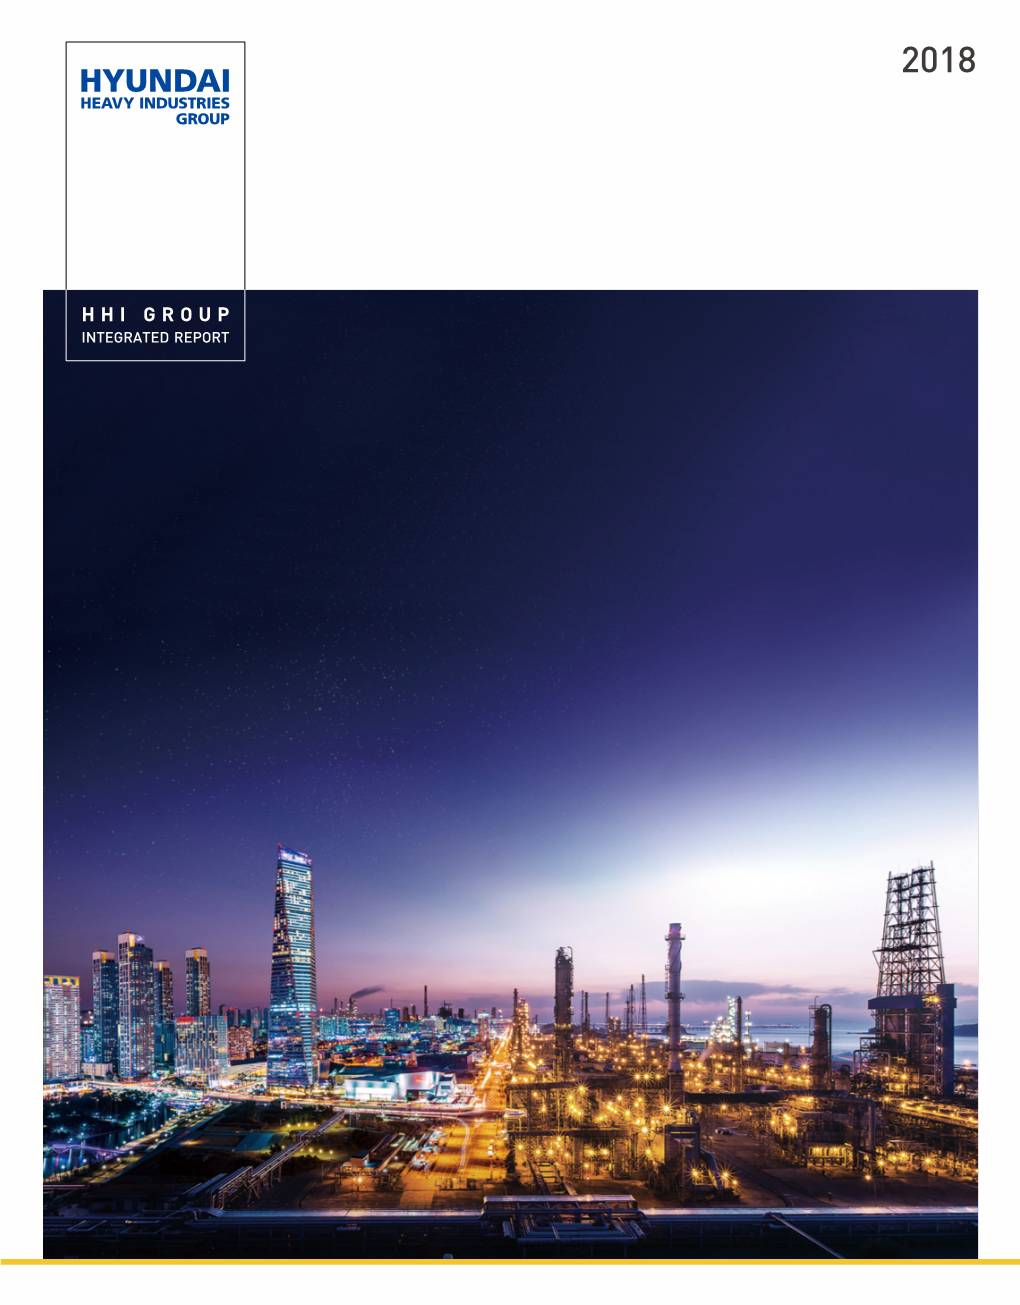 2018 HHI Group Integrated Report Introduces Activities and Achievements of Hyundai Heavy Industries Group in Sustainable Management